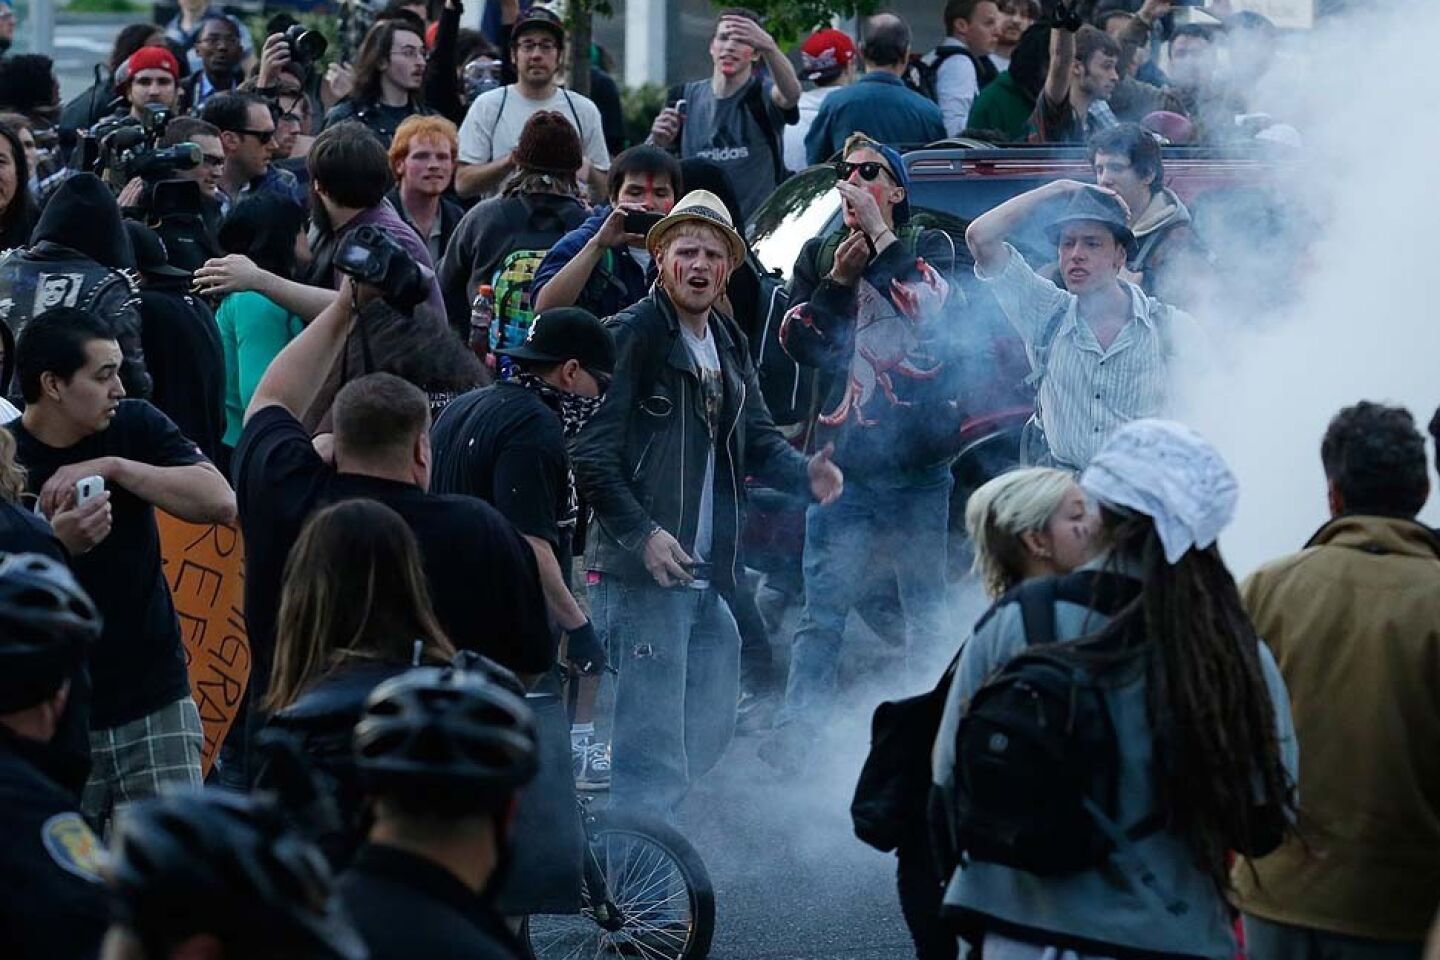 May Day clashes in Seattle